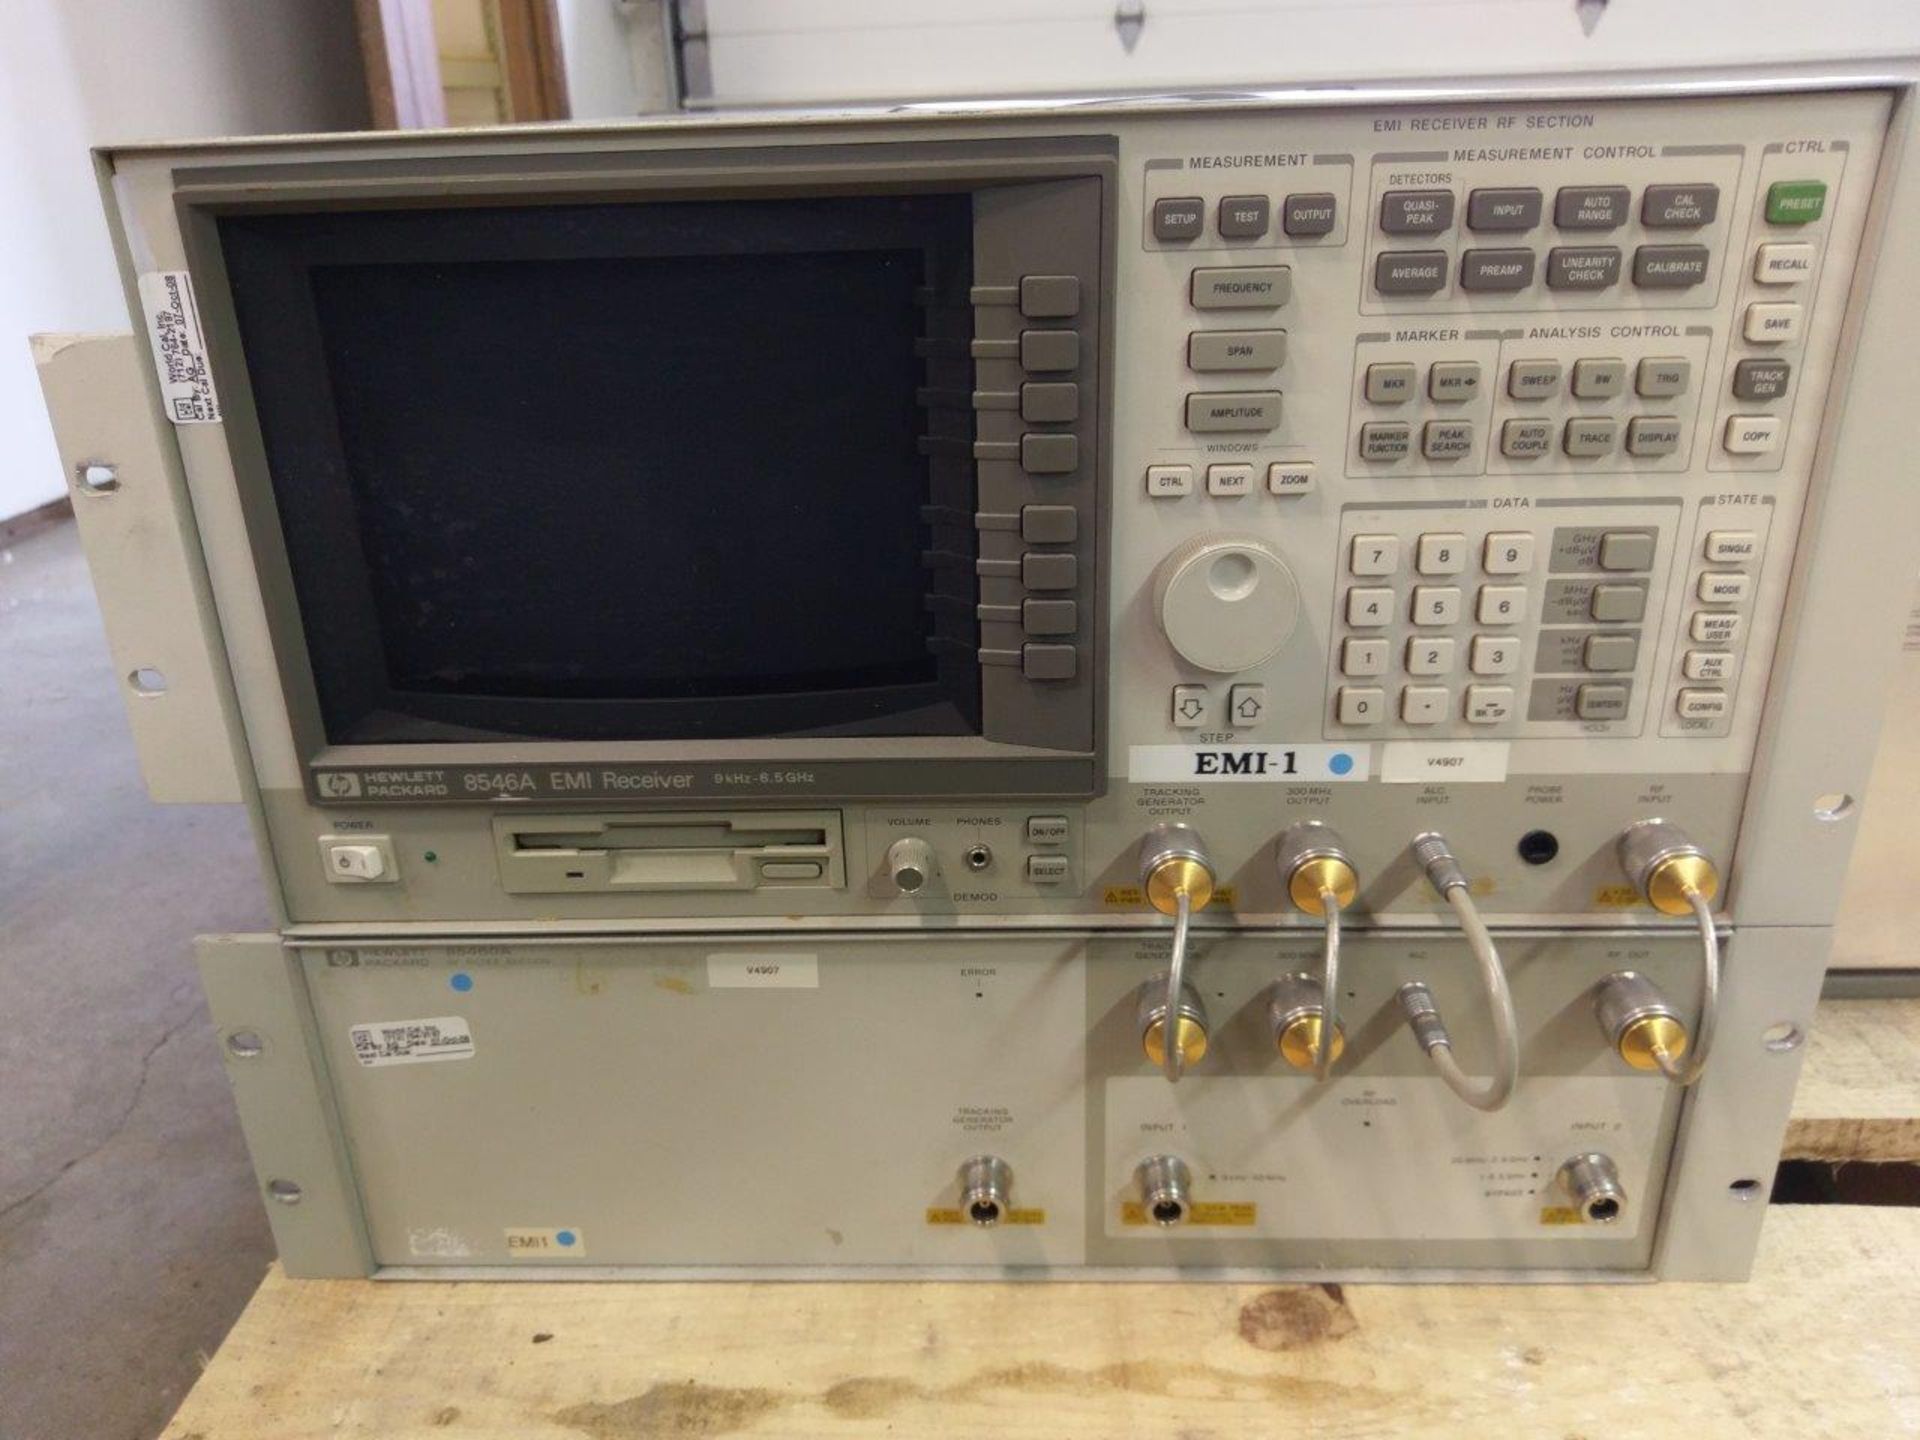 HP Hewlett Packard Model # 8546A EMI Receiver with Model # 85460A RF Filter Section - Image 2 of 8